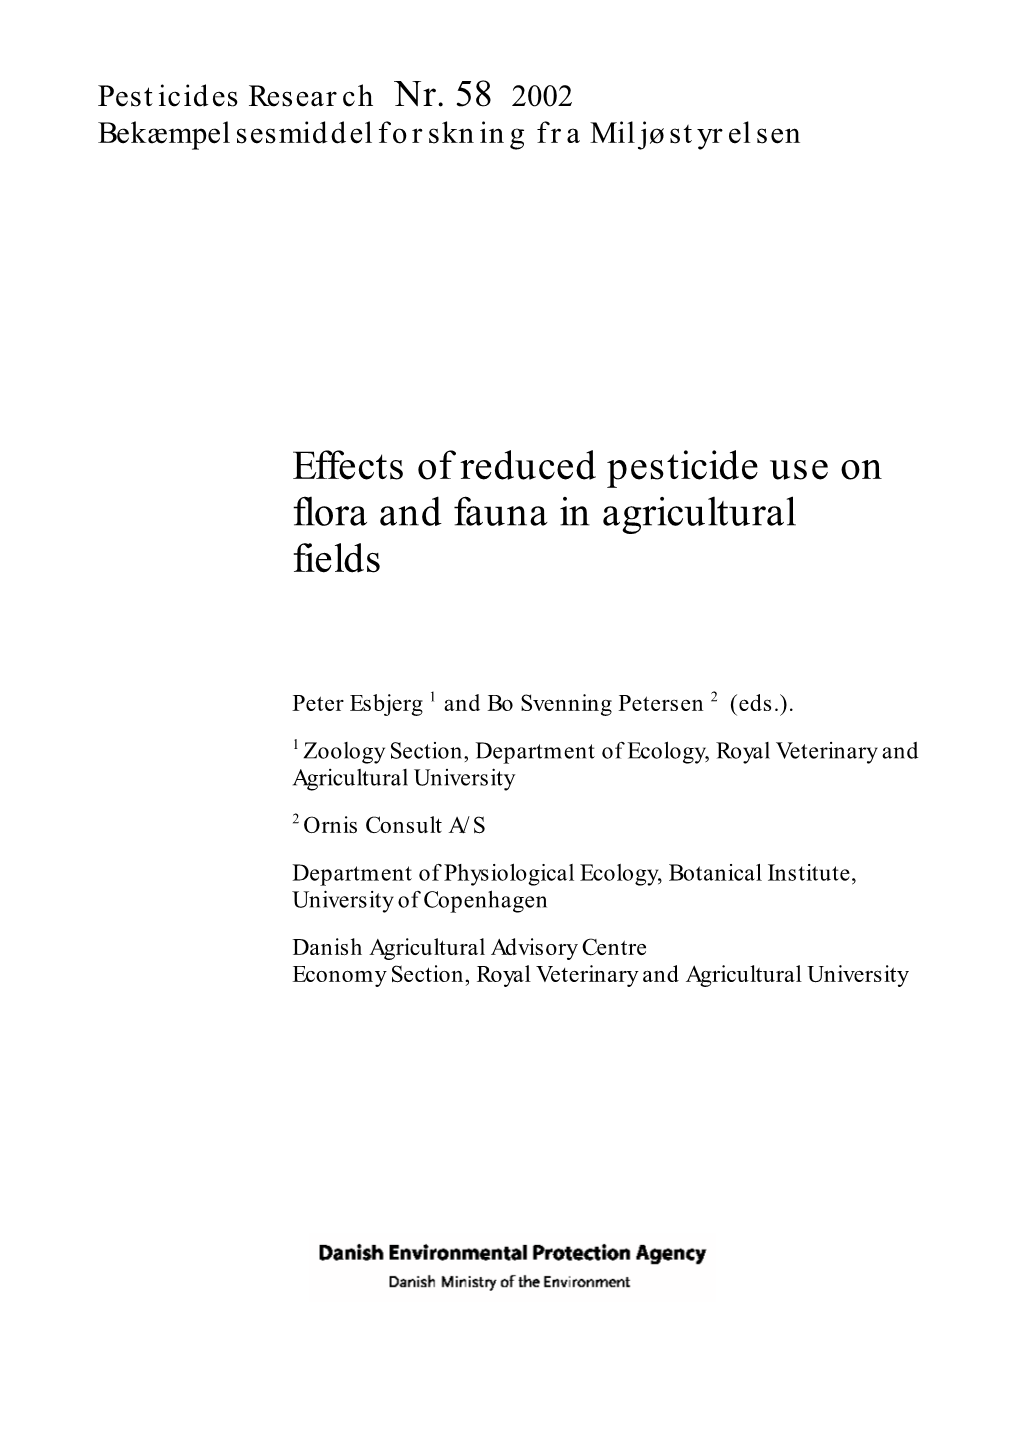 Effects of Reduced Pesticide Use on Flora and Fauna in Agricultural Fields